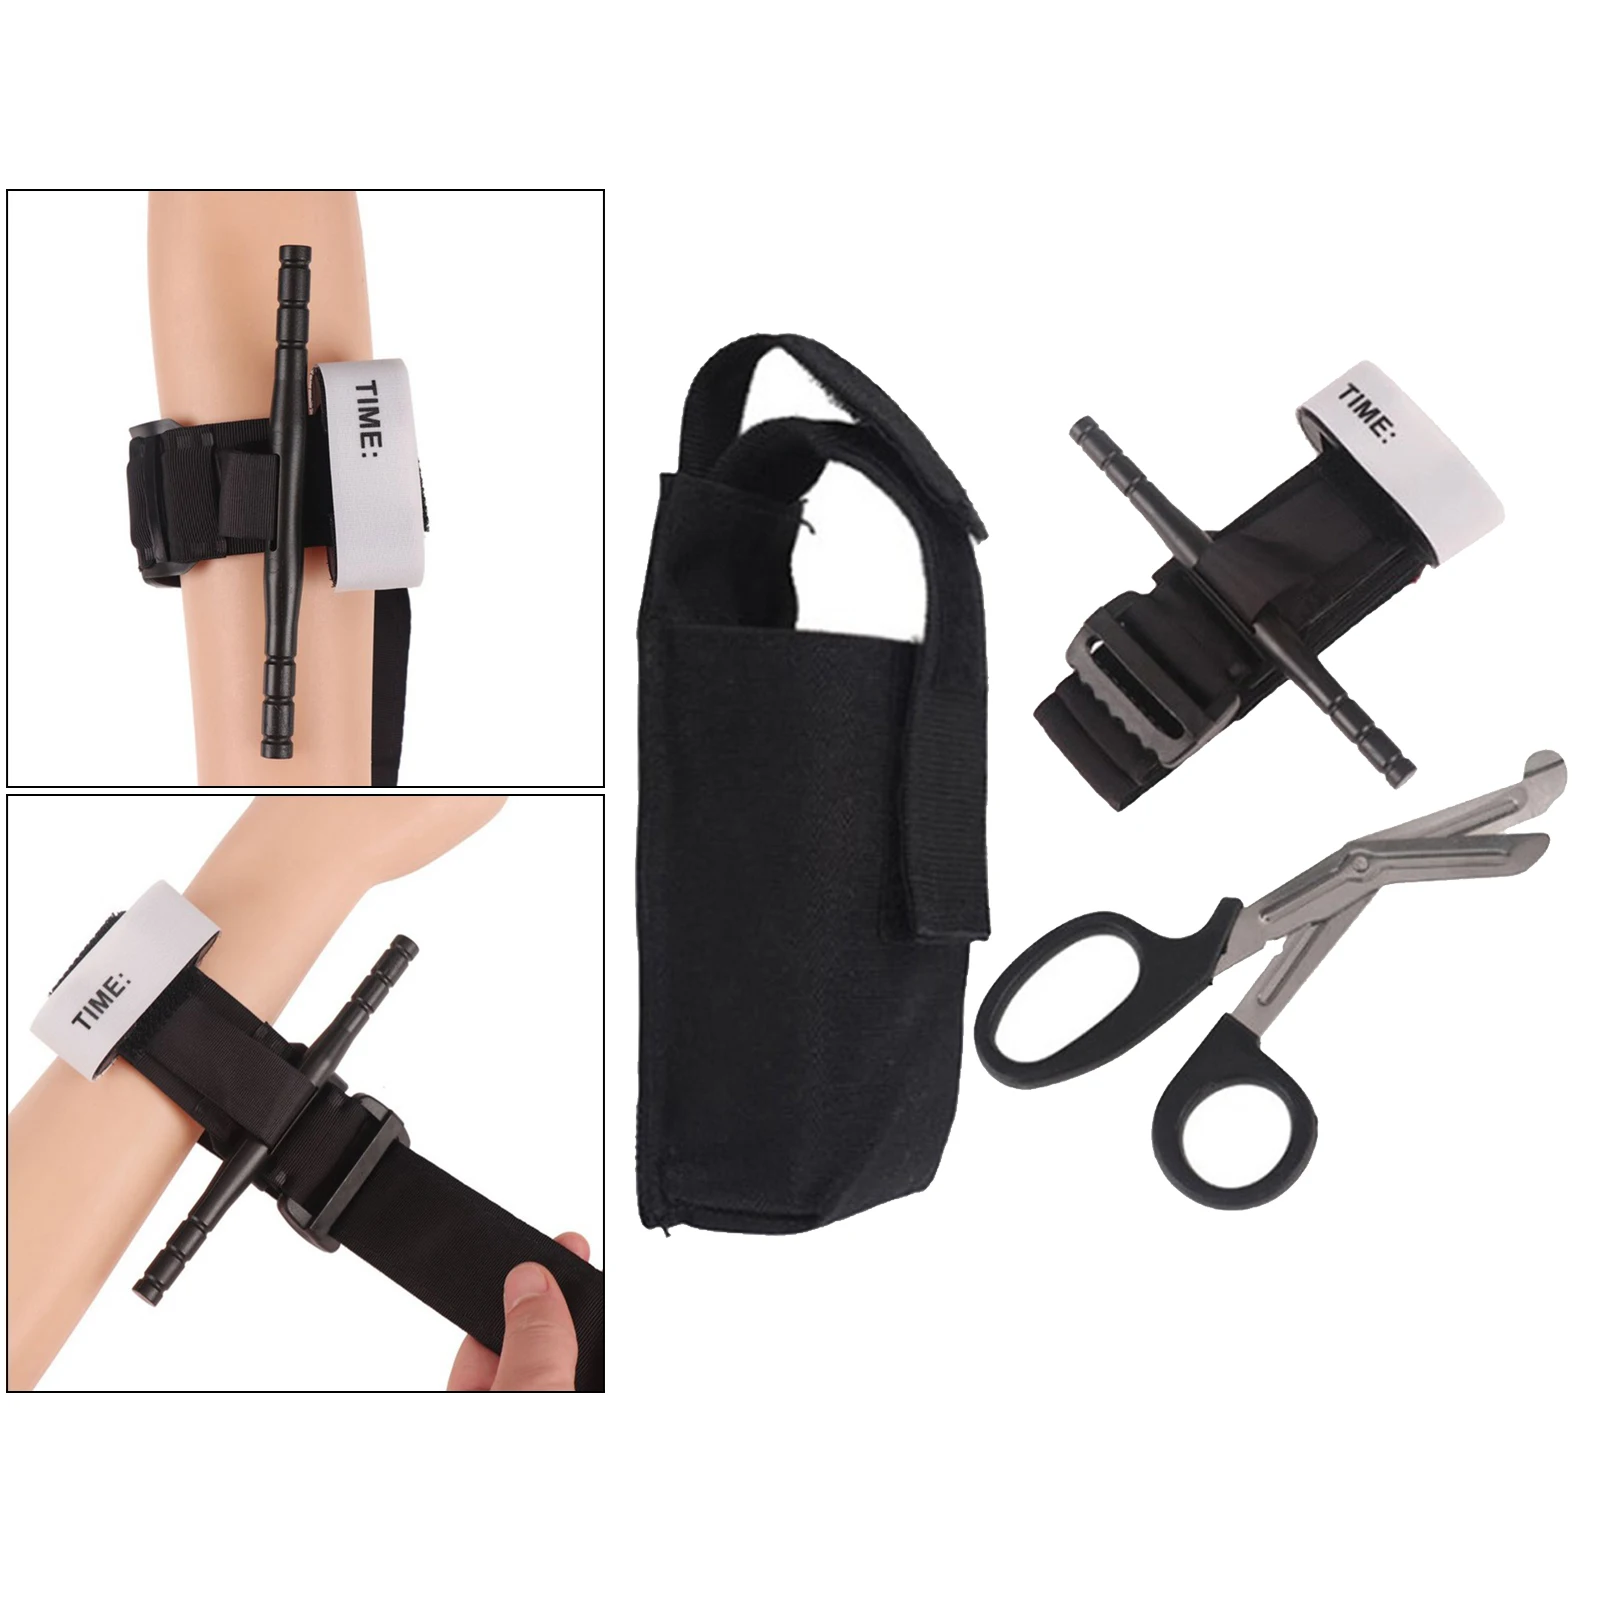 Outdoor survival tourniquet fast hemostasis Medical emergency first aid tactical military easy one-handed operation